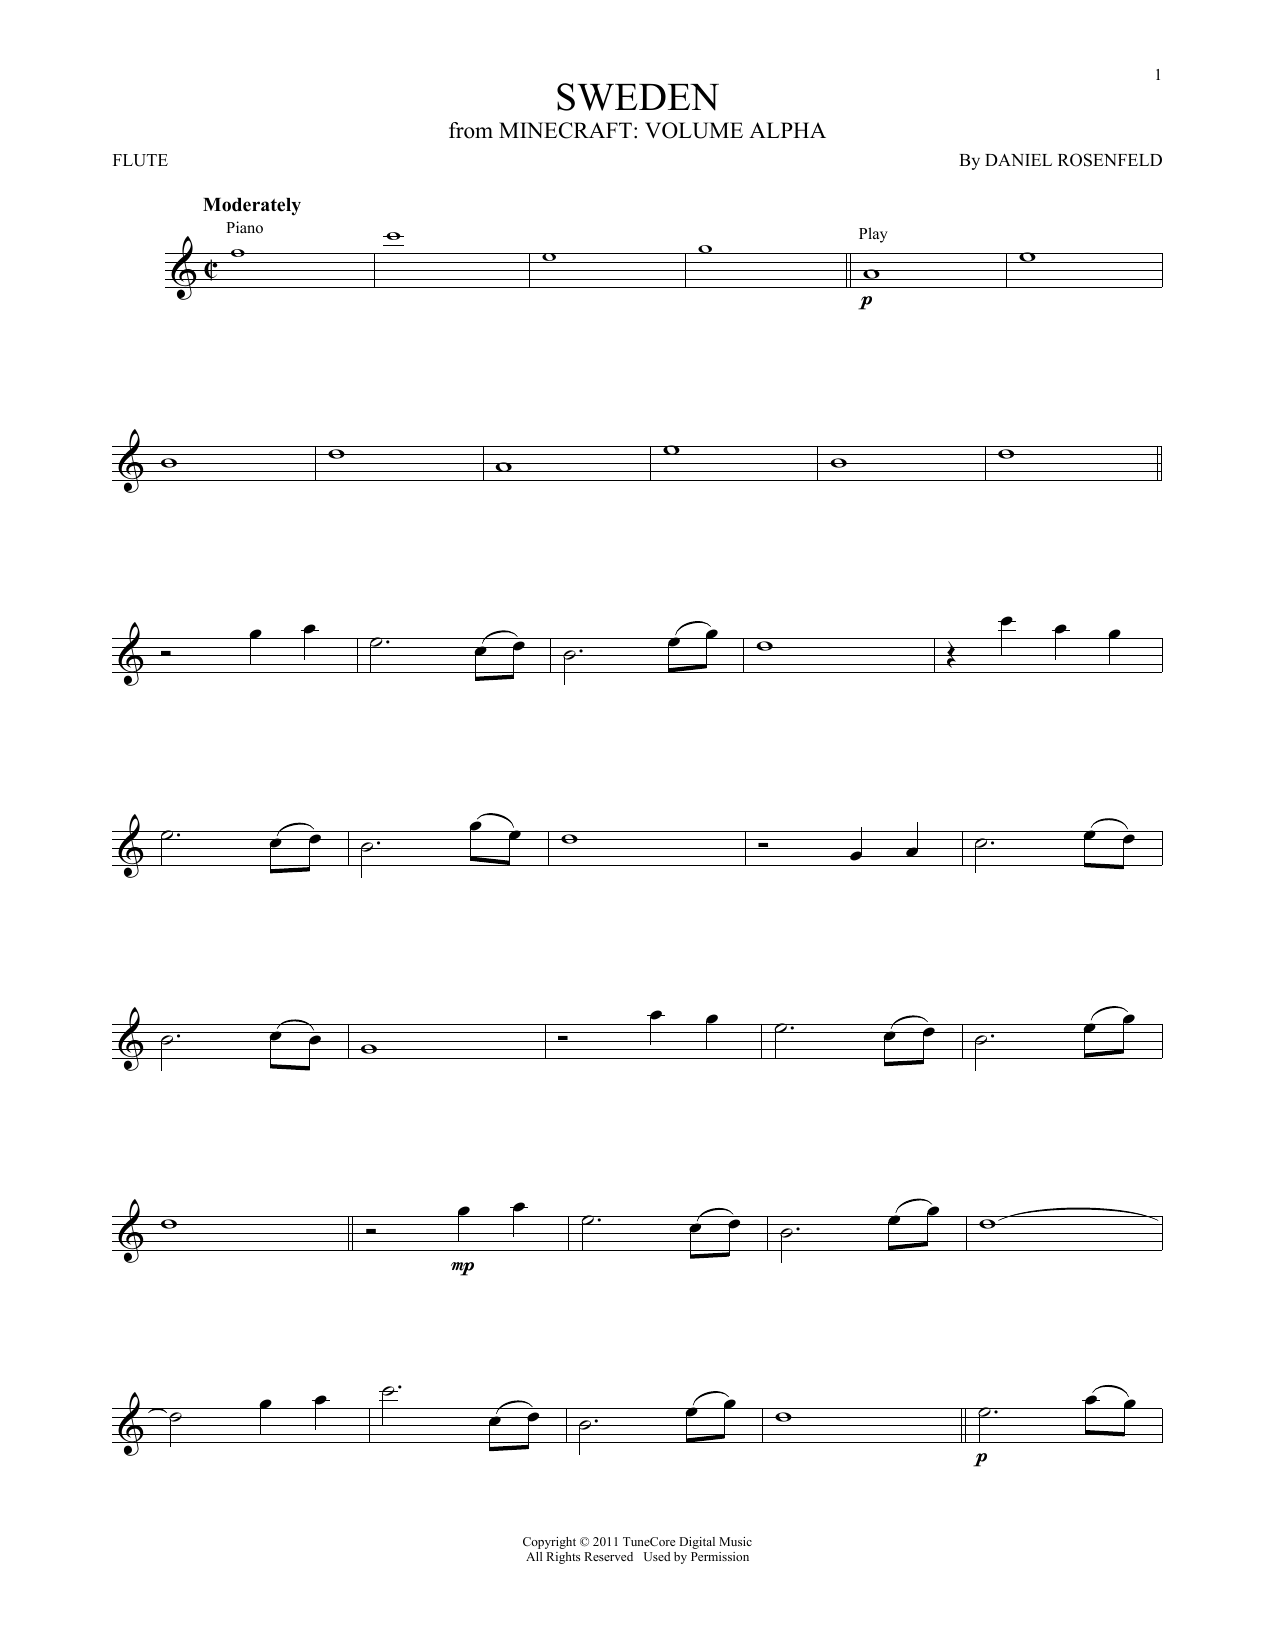 C418 "Sweden (from Minecraft)" Sheet Music | Printable Video Game PDF Score | How Play On Solo? SKU 1253532